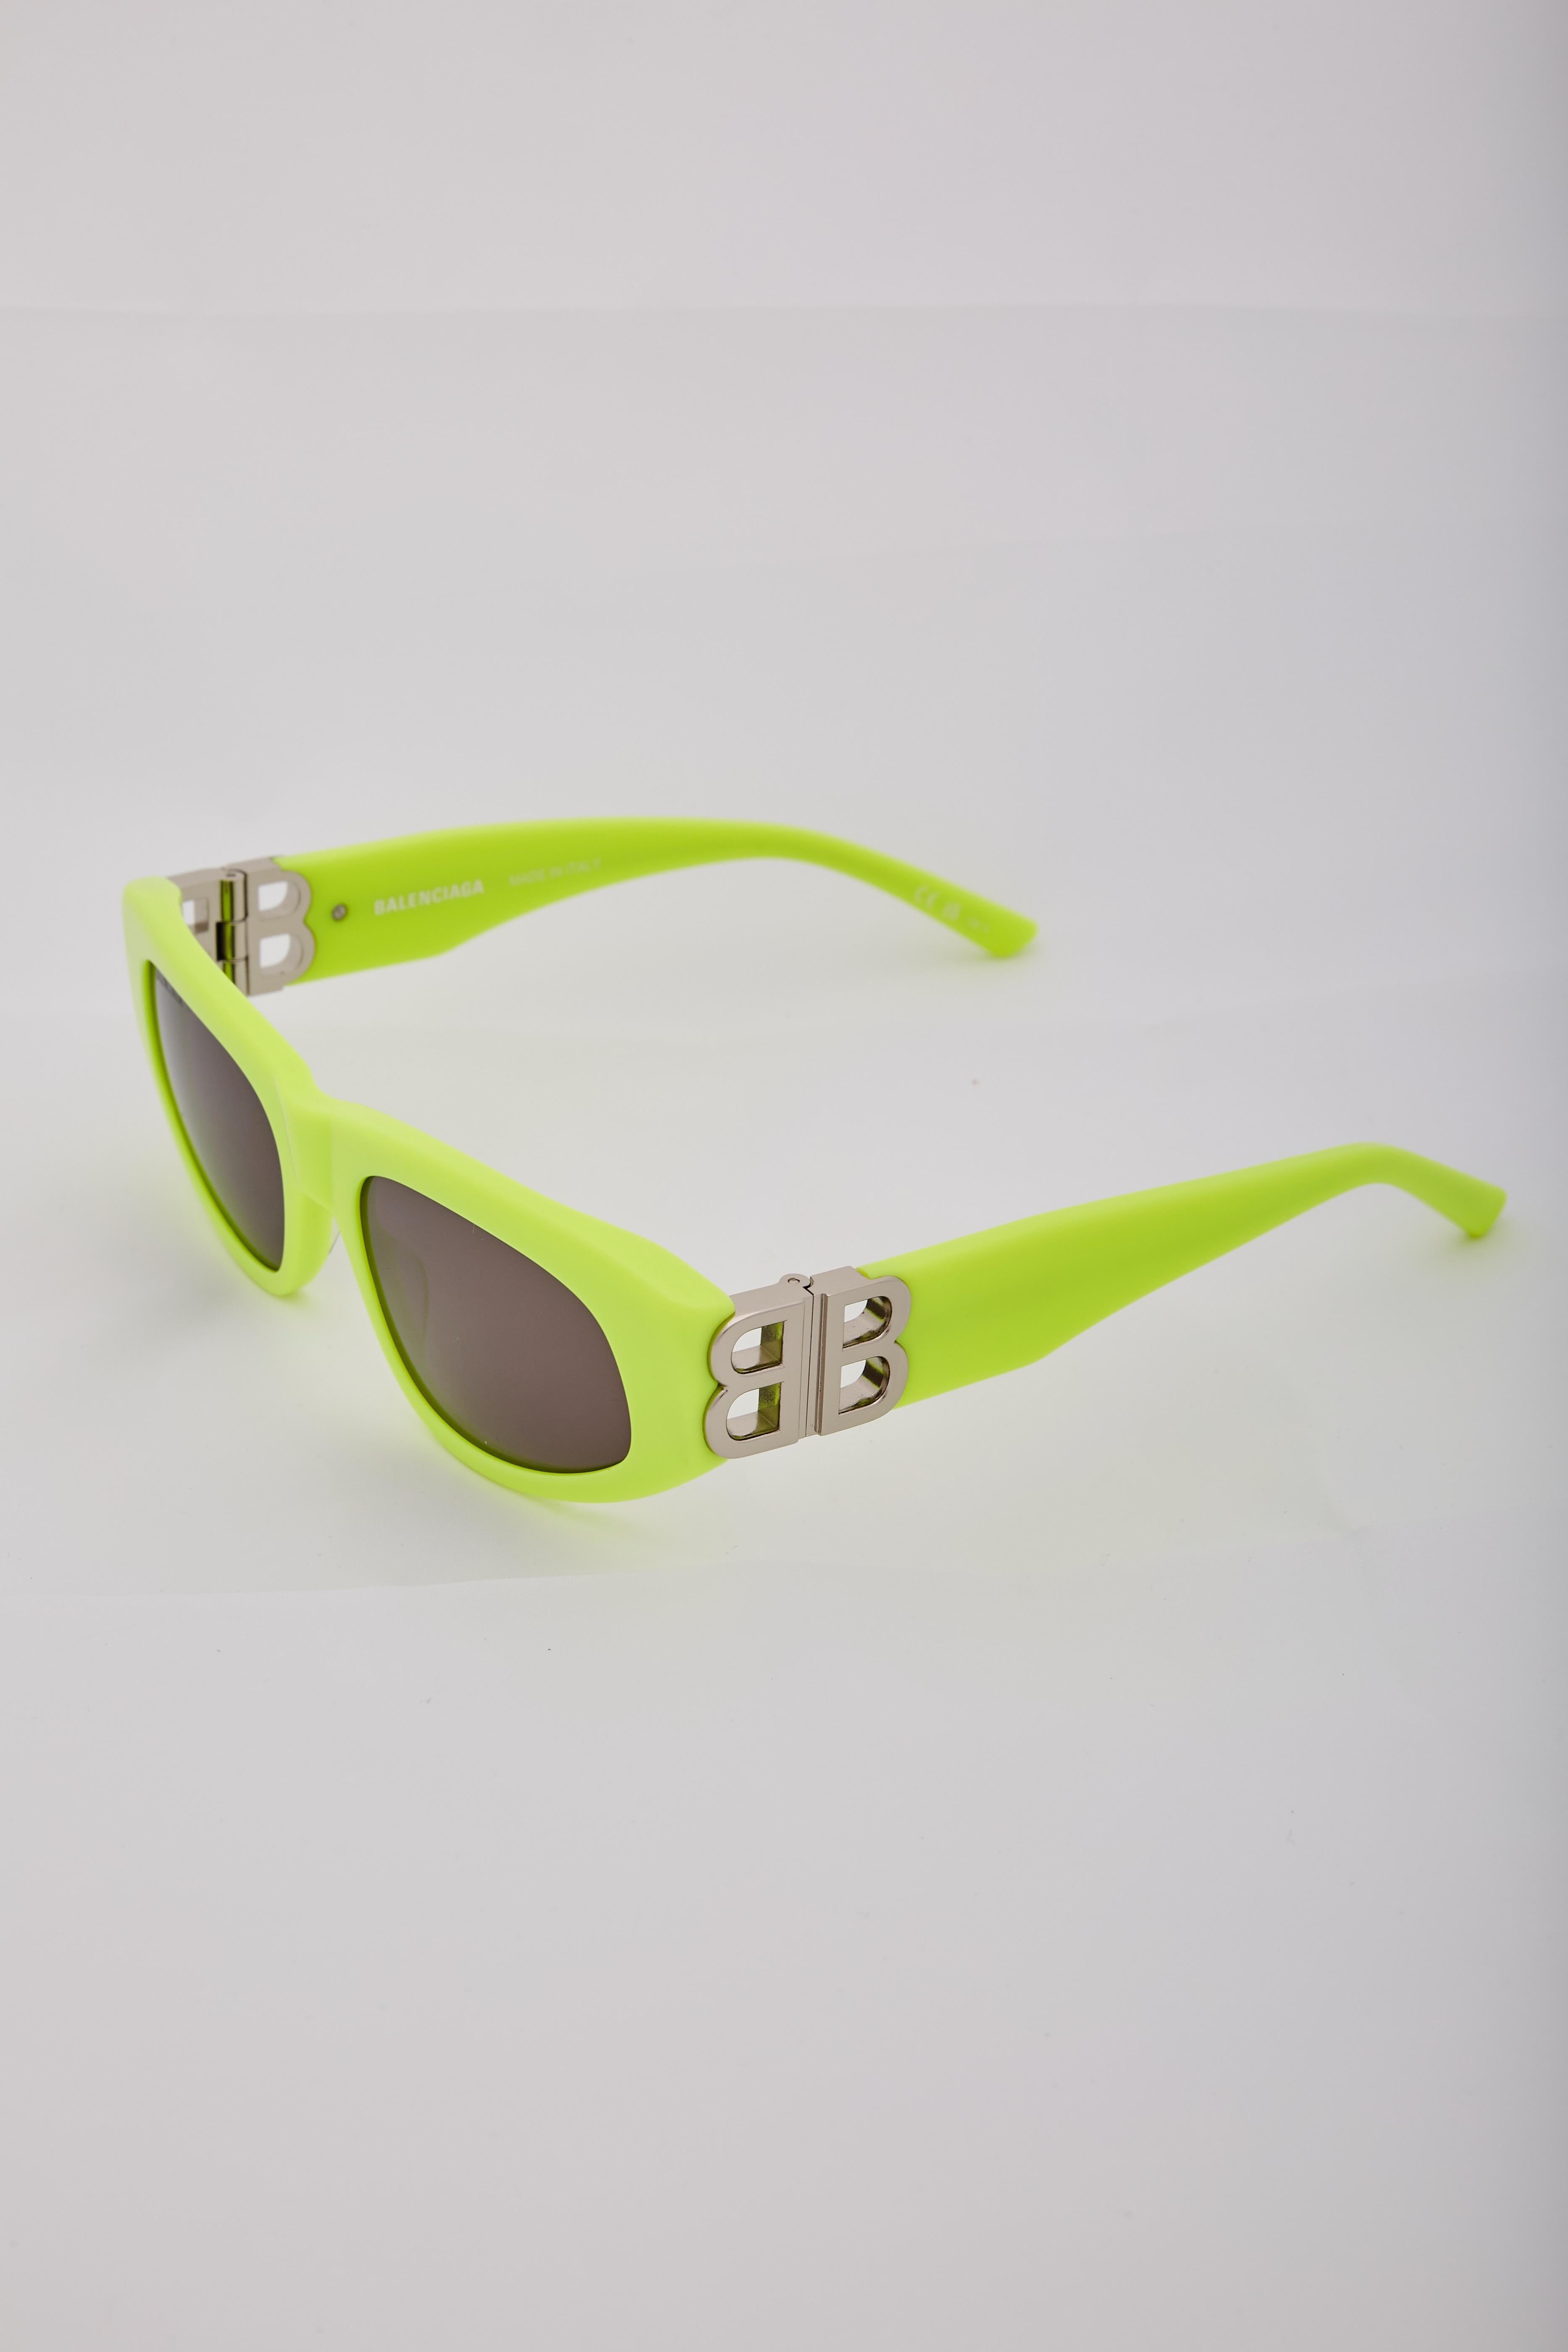 Balenciaga Dynasty Bb Rectangle Acetate Neon Yellow Sunglasses In Good Condition For Sale In Montreal, Quebec